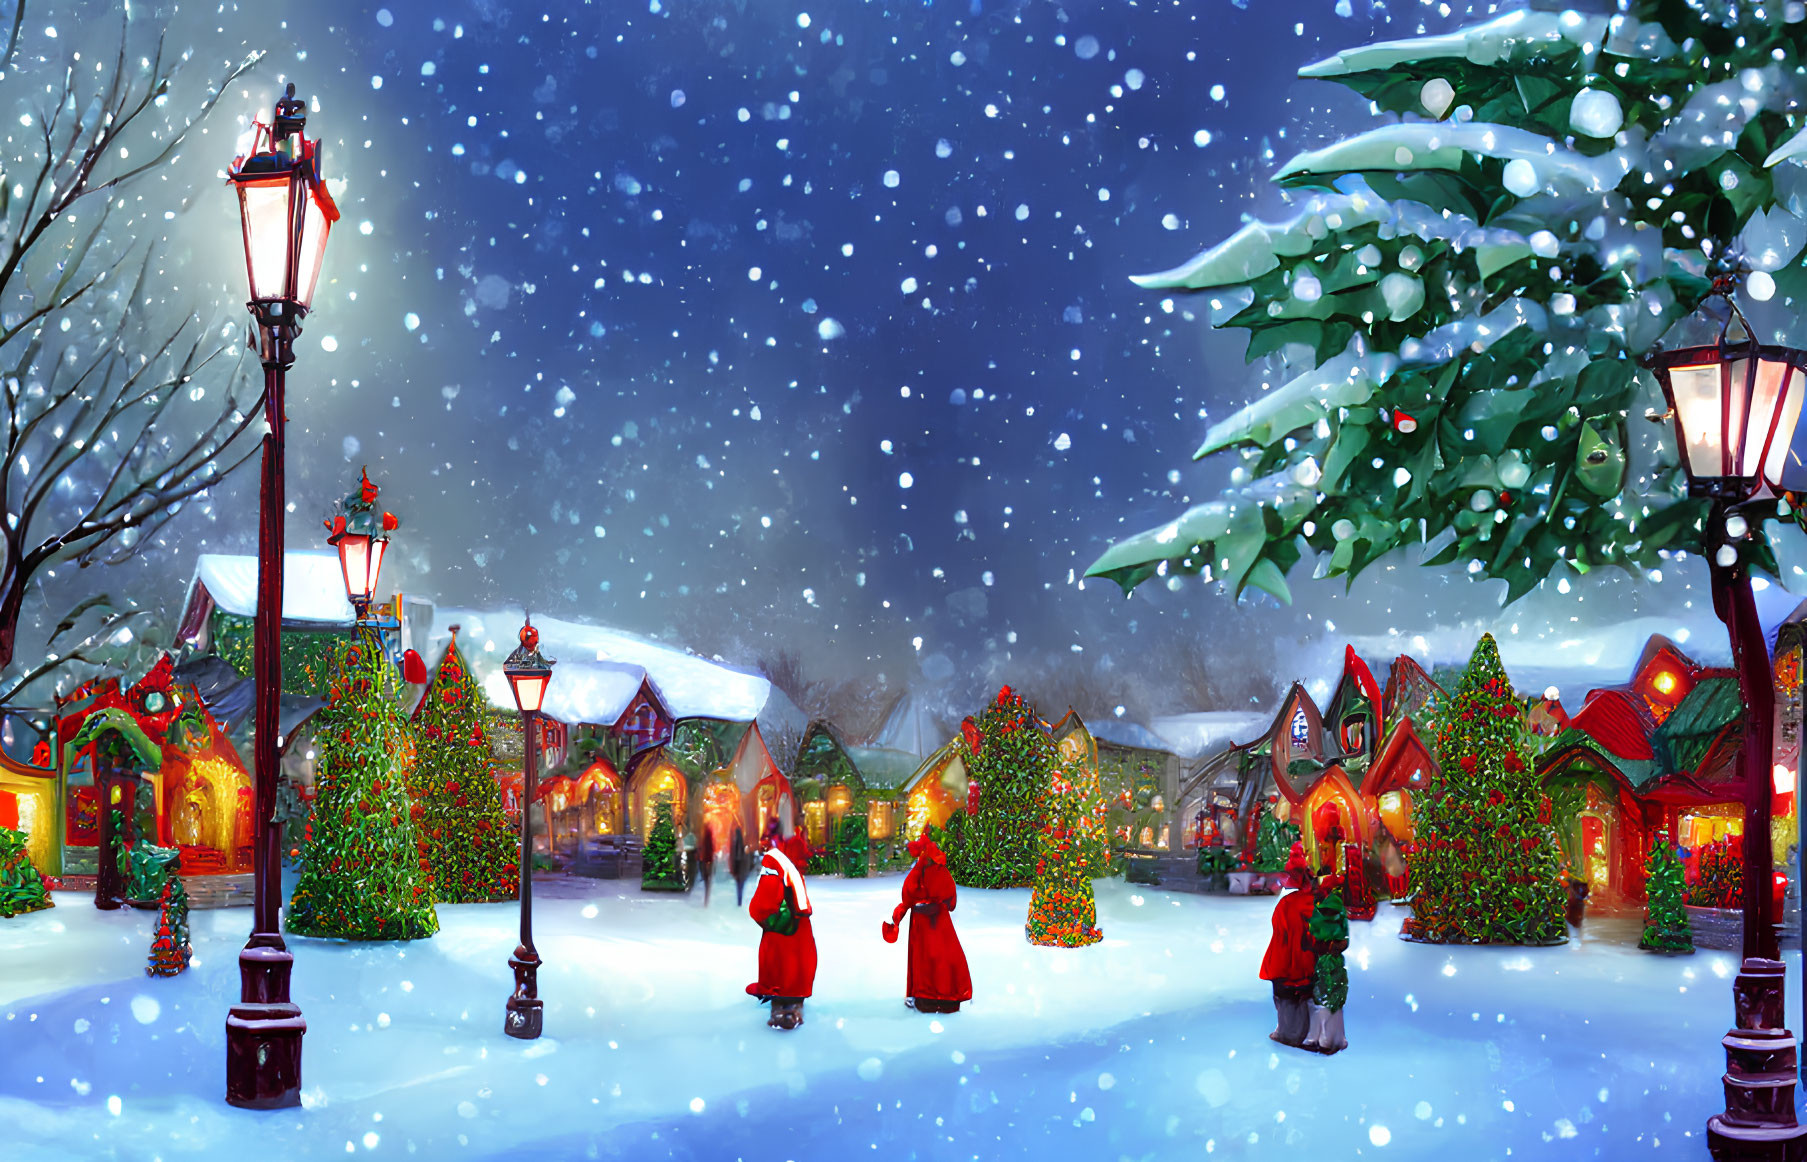 Snow-covered streets with festive decorations and red-cloaked figures.